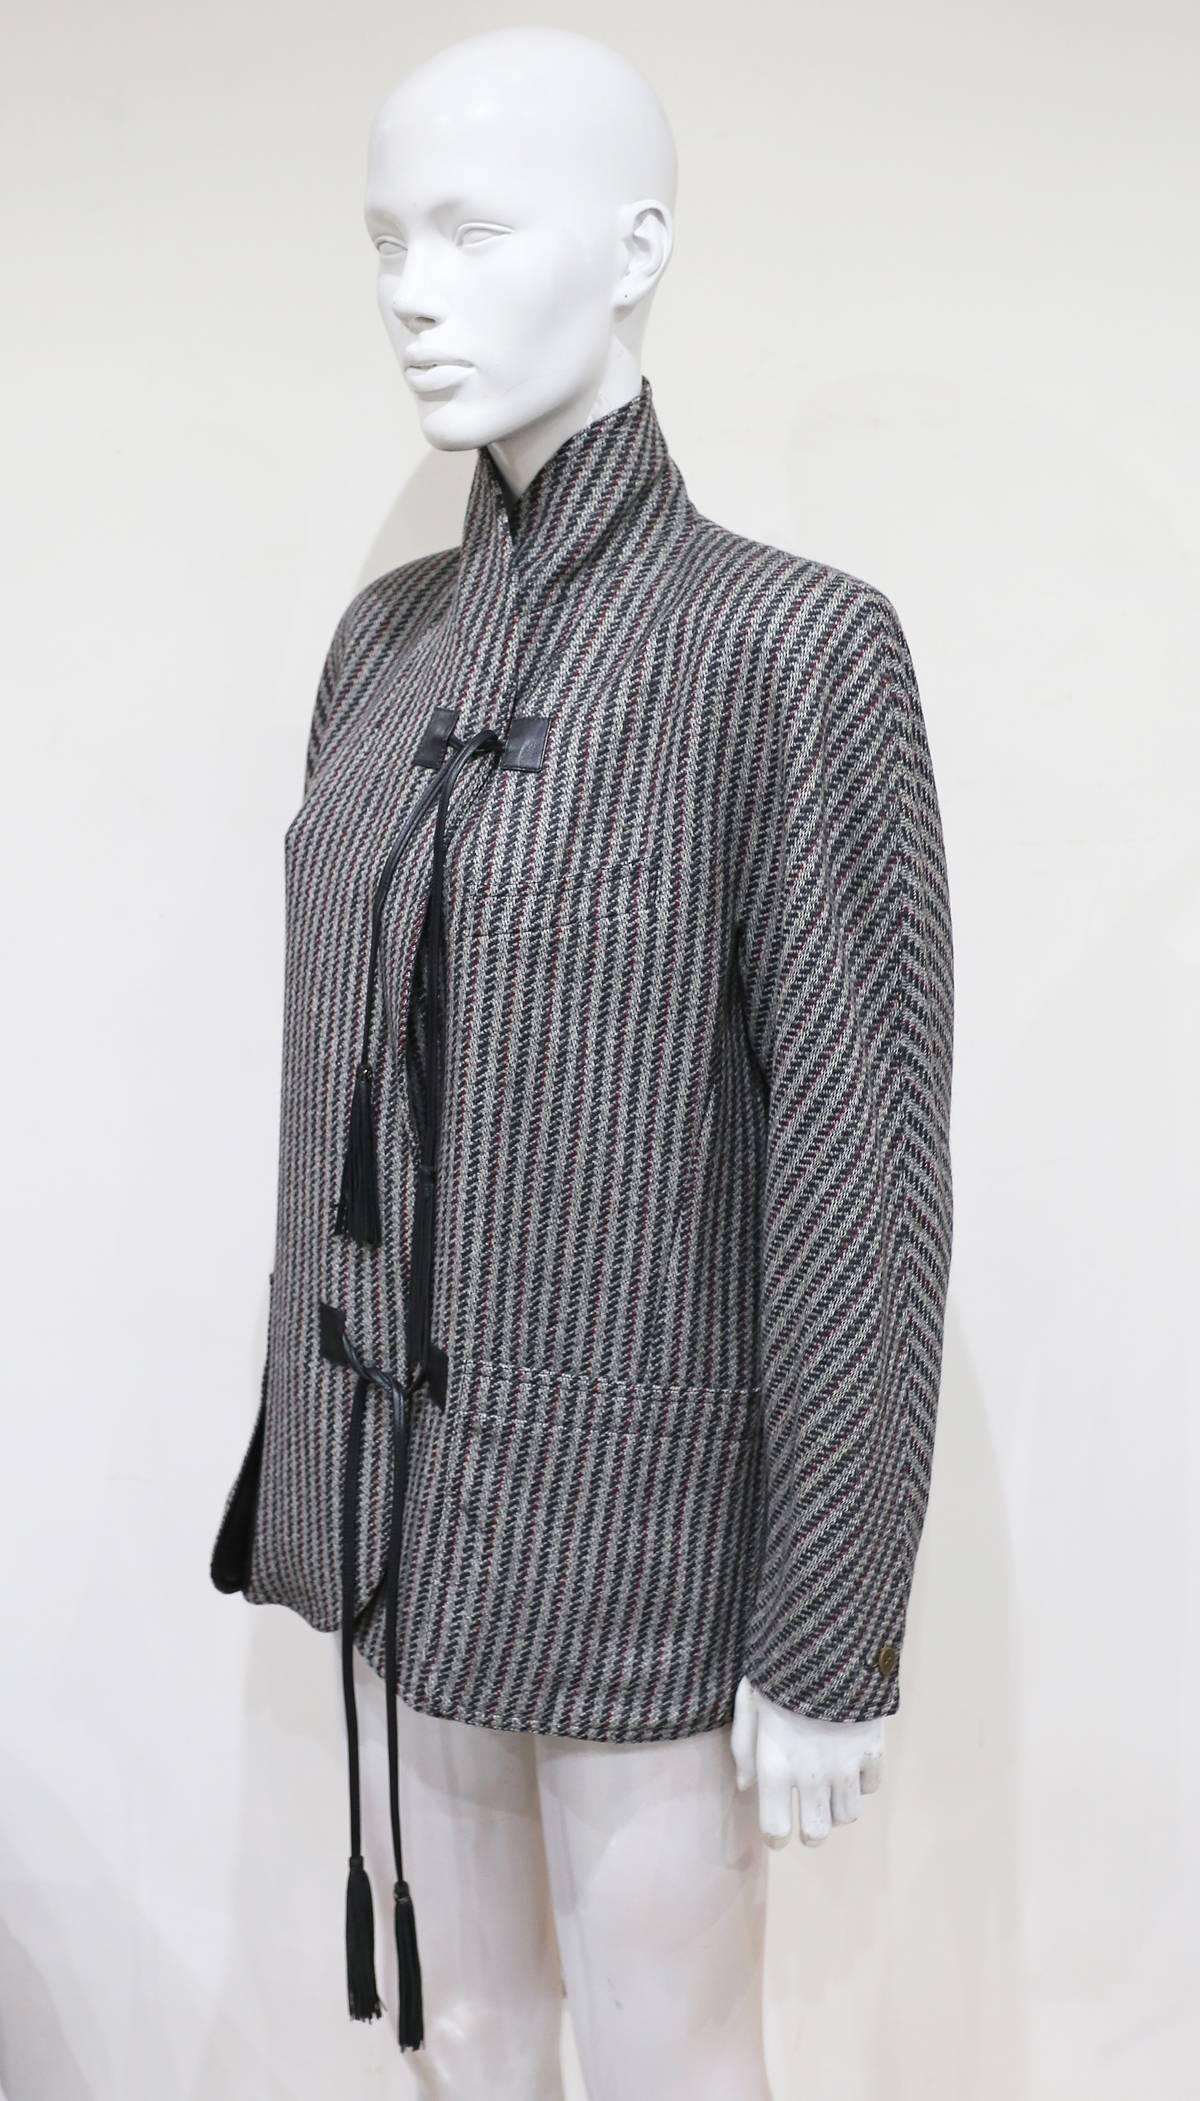 A fine women's tweed blazer by Gucci, circa 1980s. The blazer features leather assets on the front pockets, leather tassels on both closures and Gucci monogram silk lining. The jacket can be styled with a high neck or with a collar. 

Italian 42 -